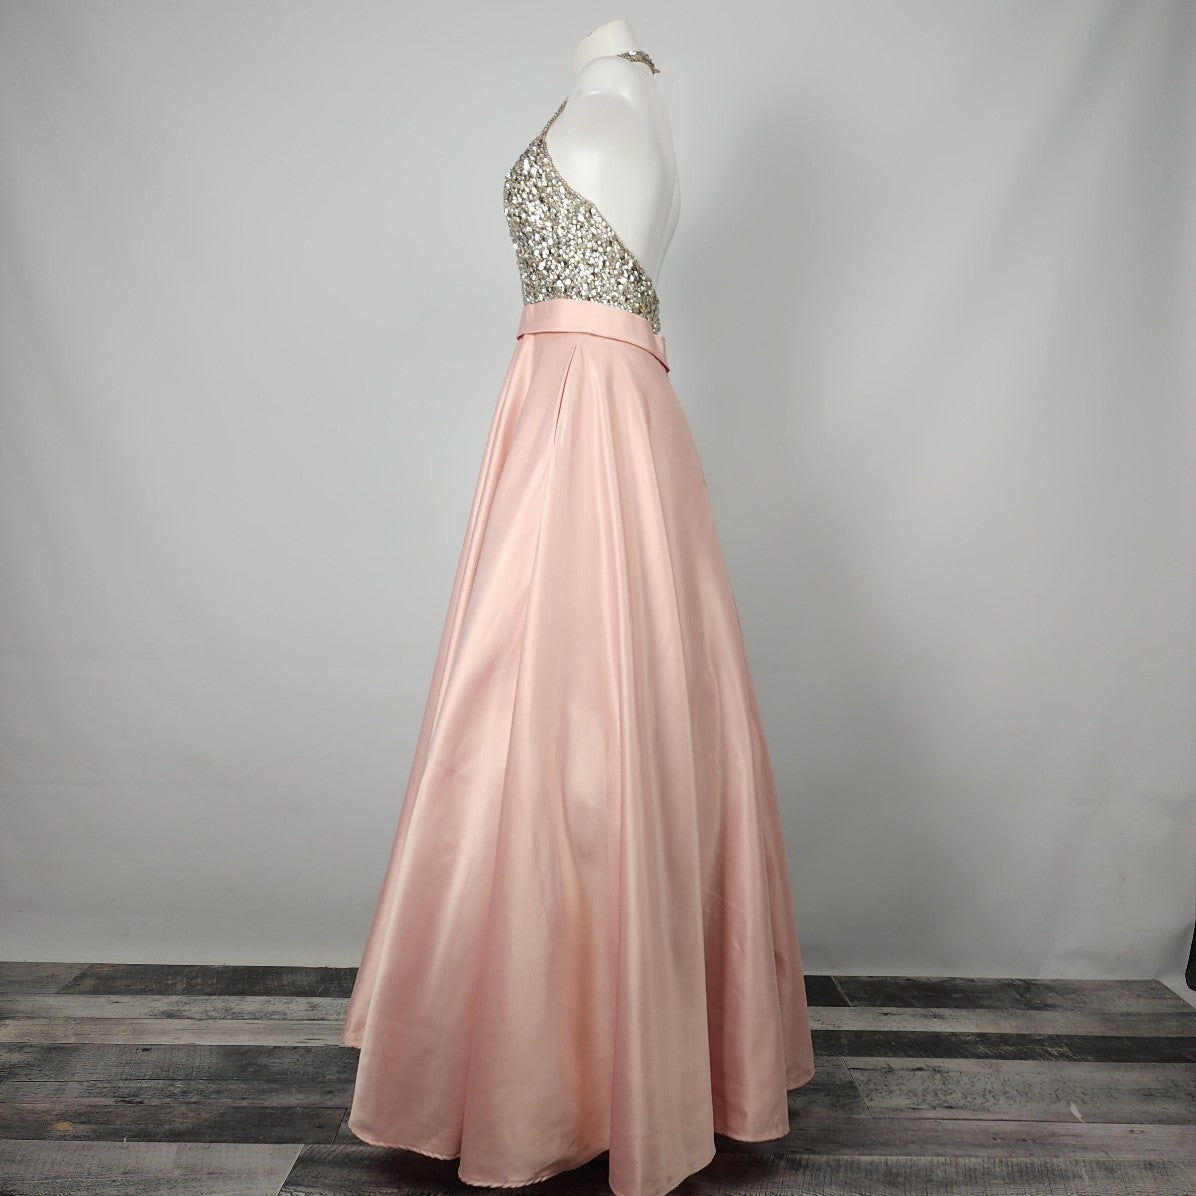 Aspeed Pink Satin Crystal Beaded Halter Neck Grad Prom Gown Size 6/8